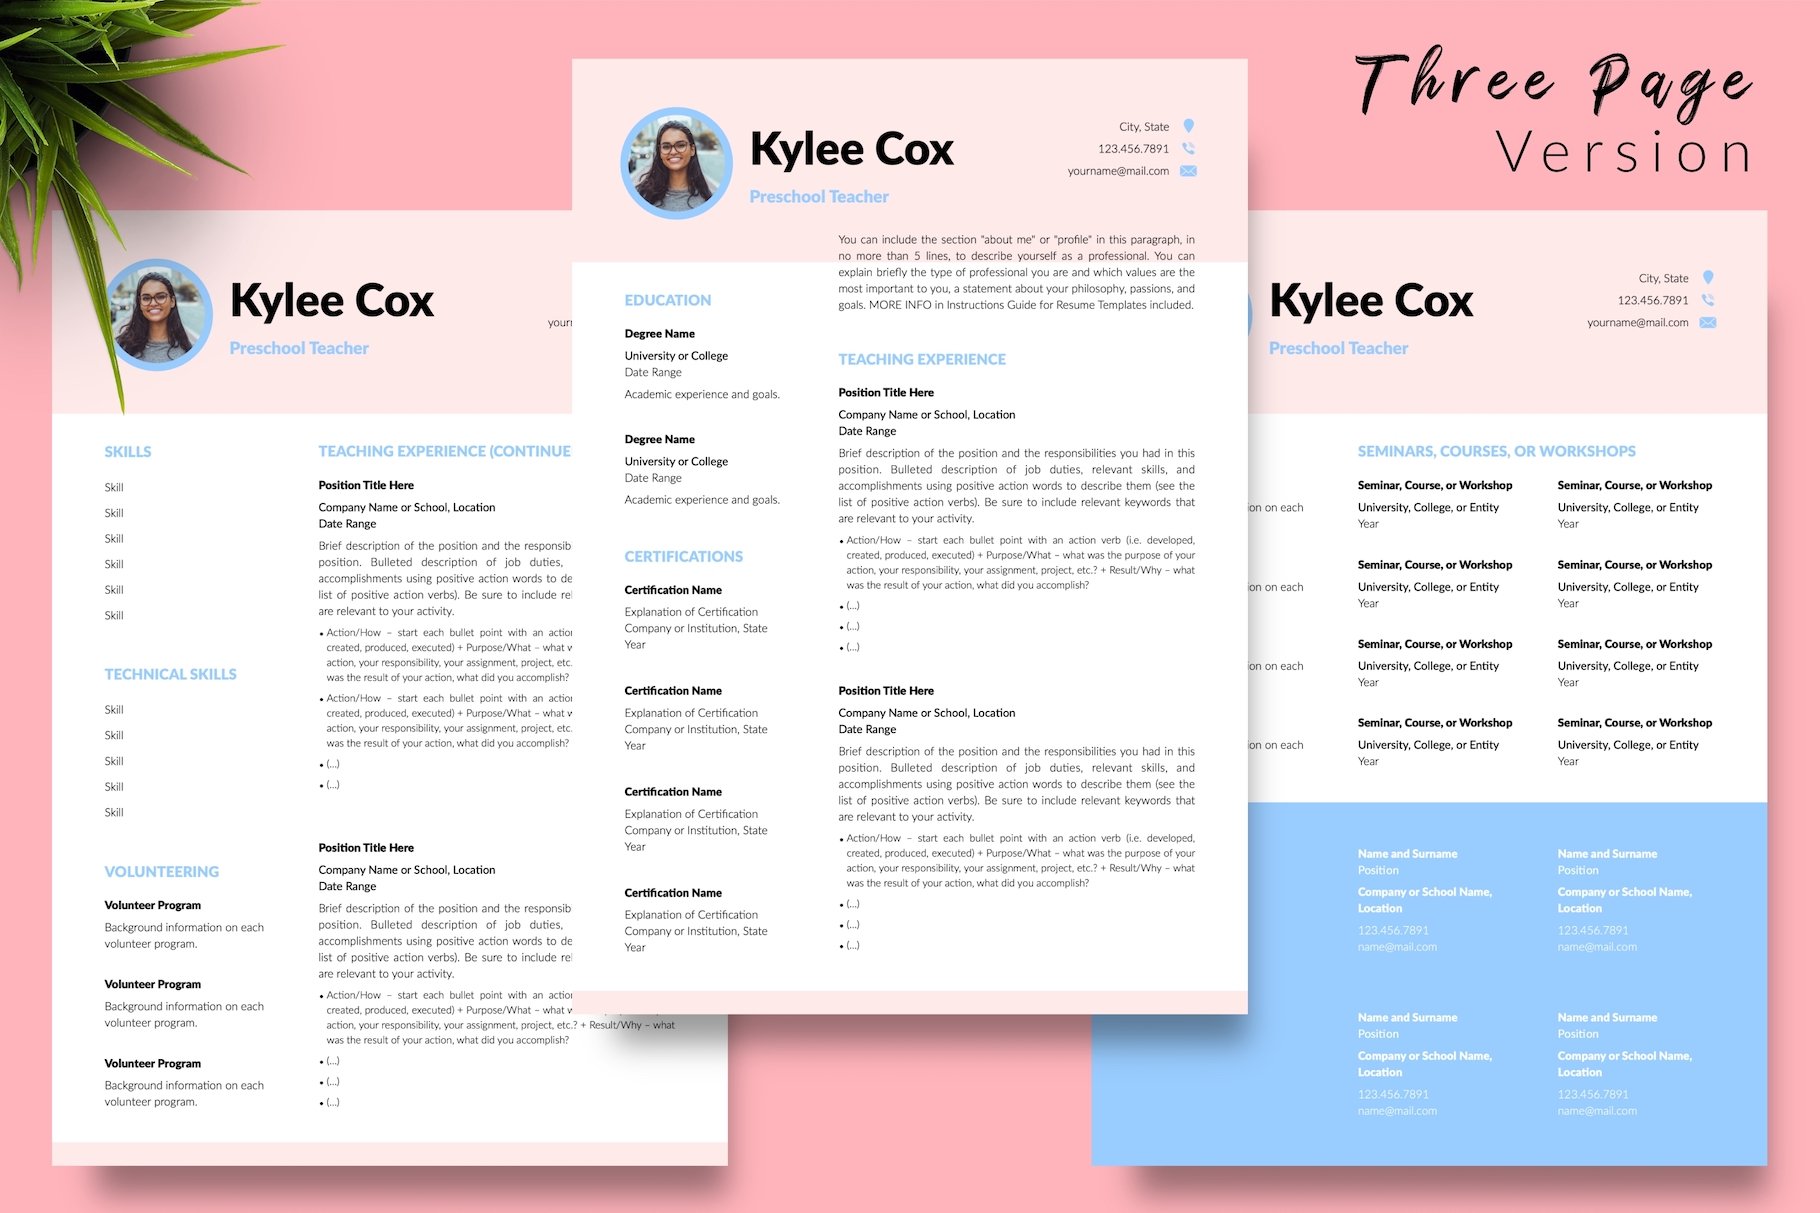 resume cv template kylie cox for creative market 04 three page version 57